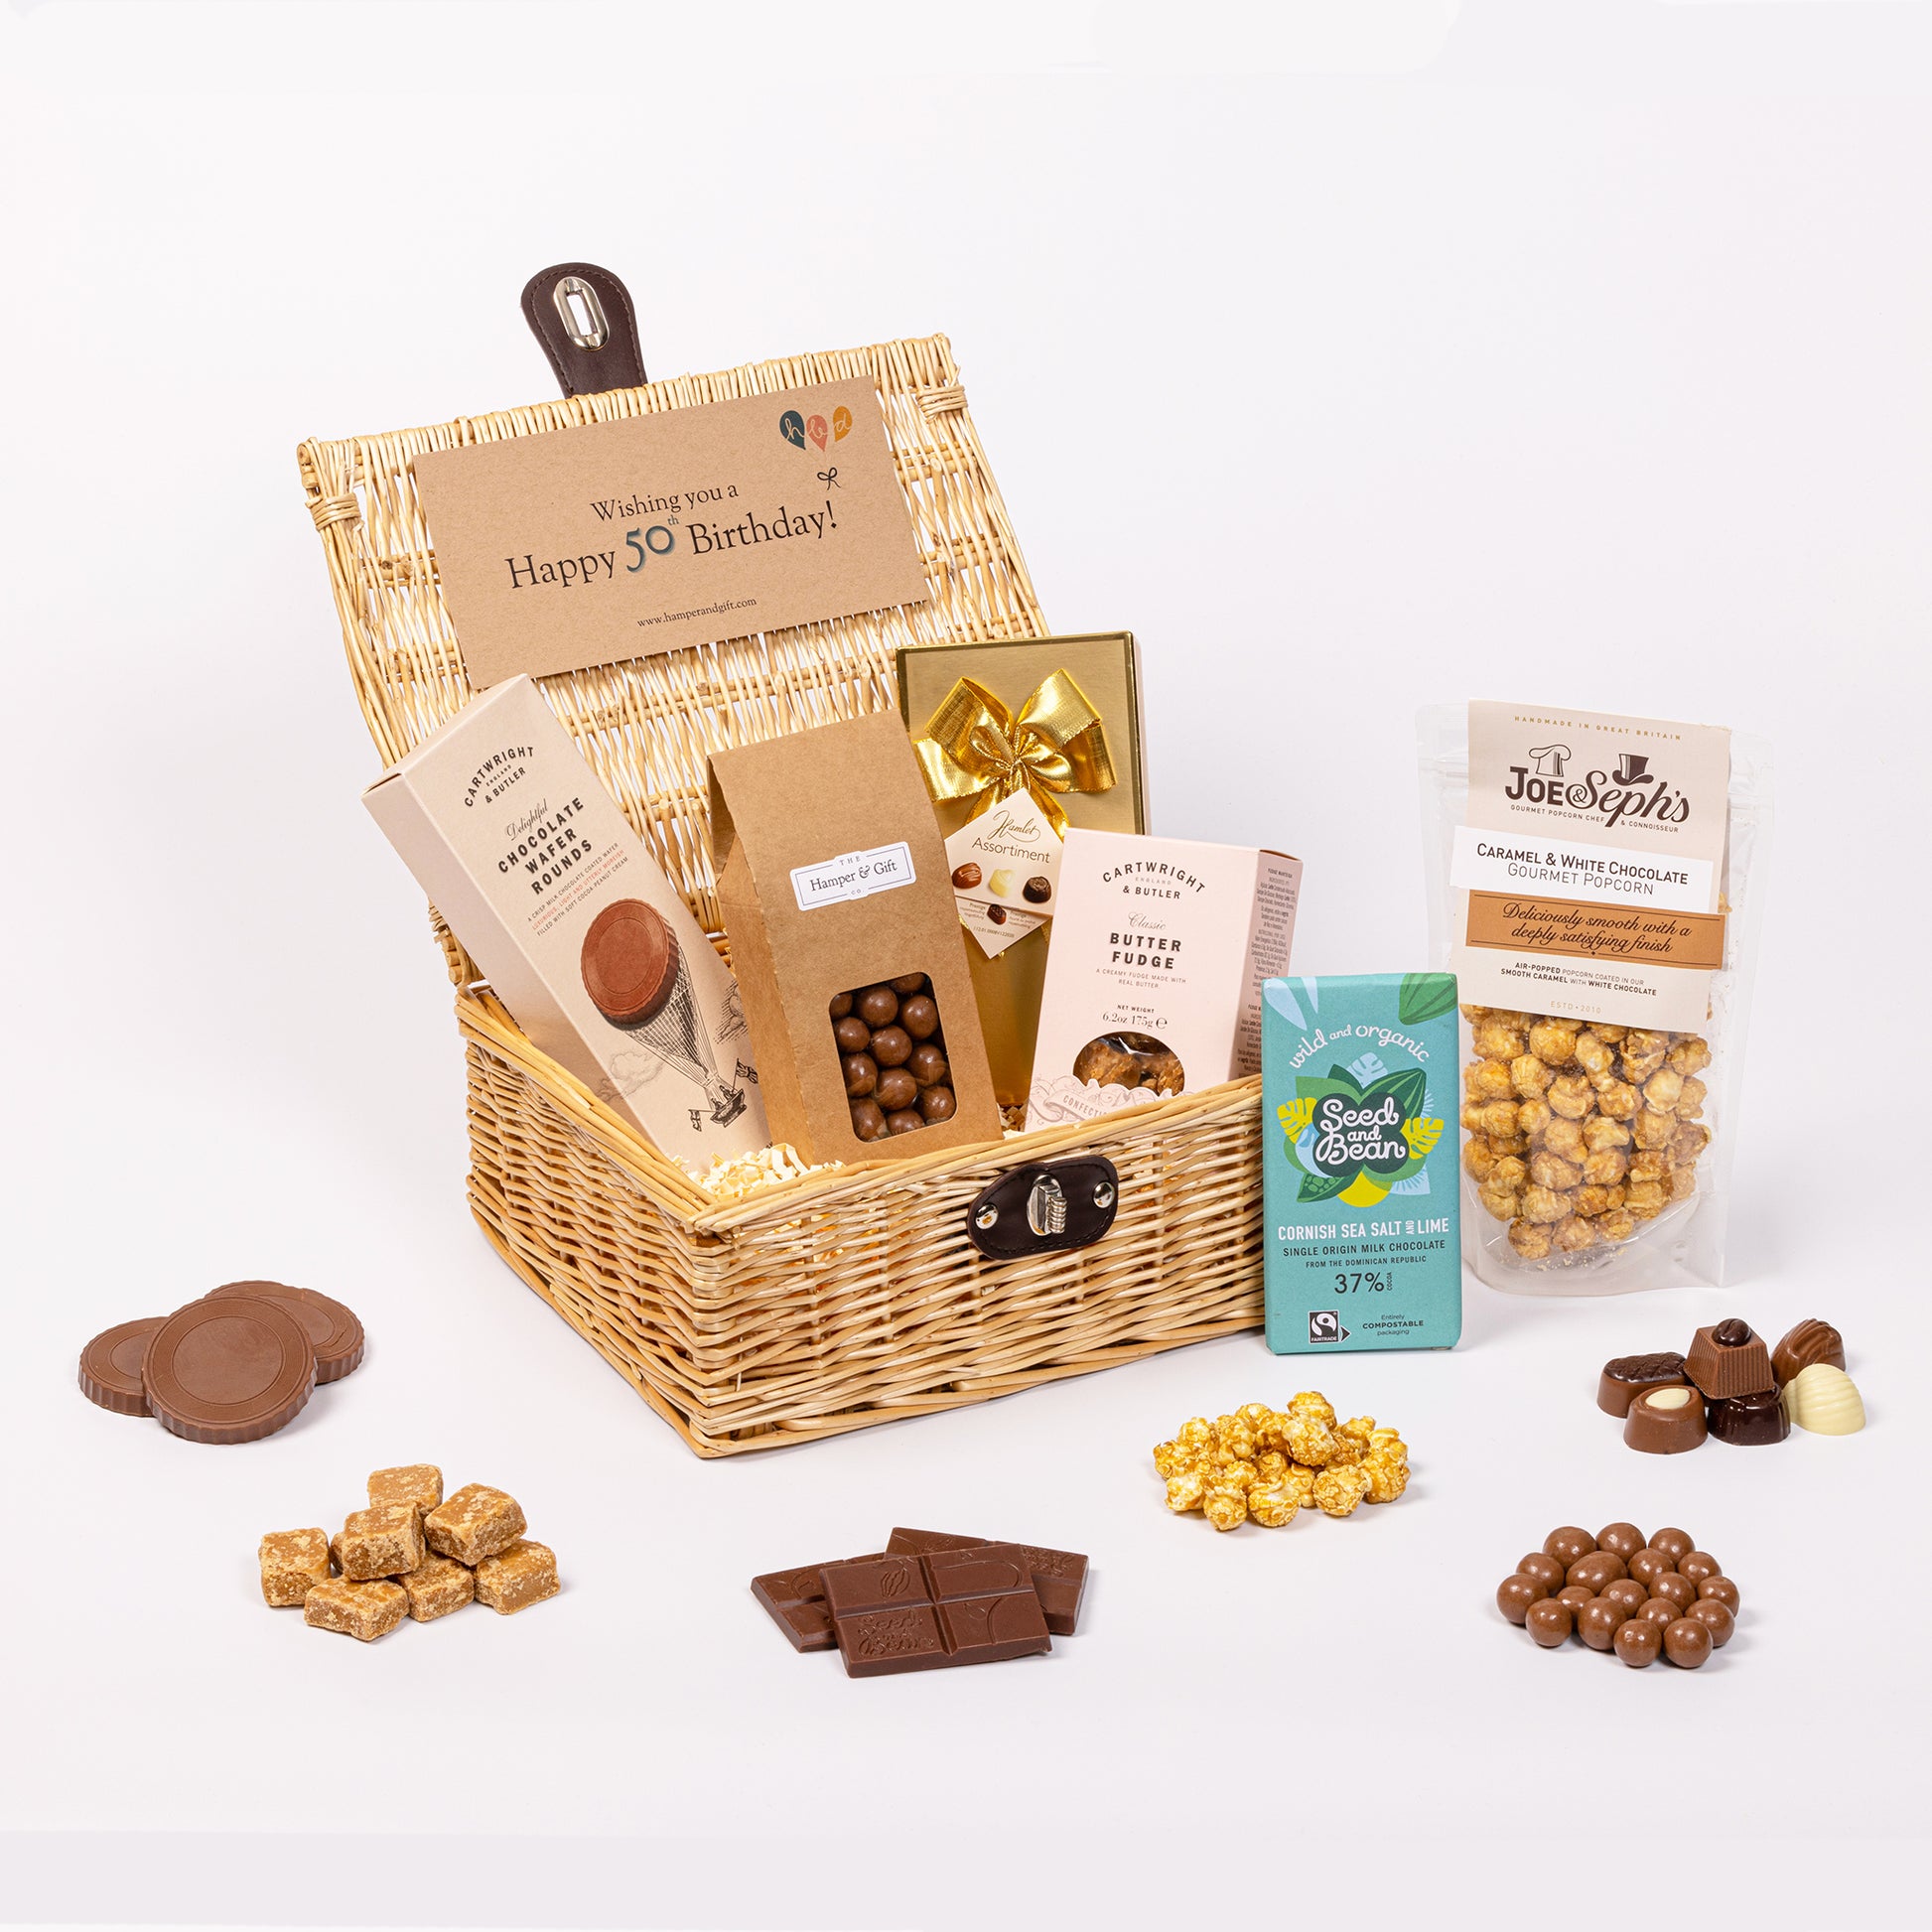 50th Birthday Chocolate & Fudge Hamper filled with a variety of chocolate, fudge, biscuit and gourmet popcorn